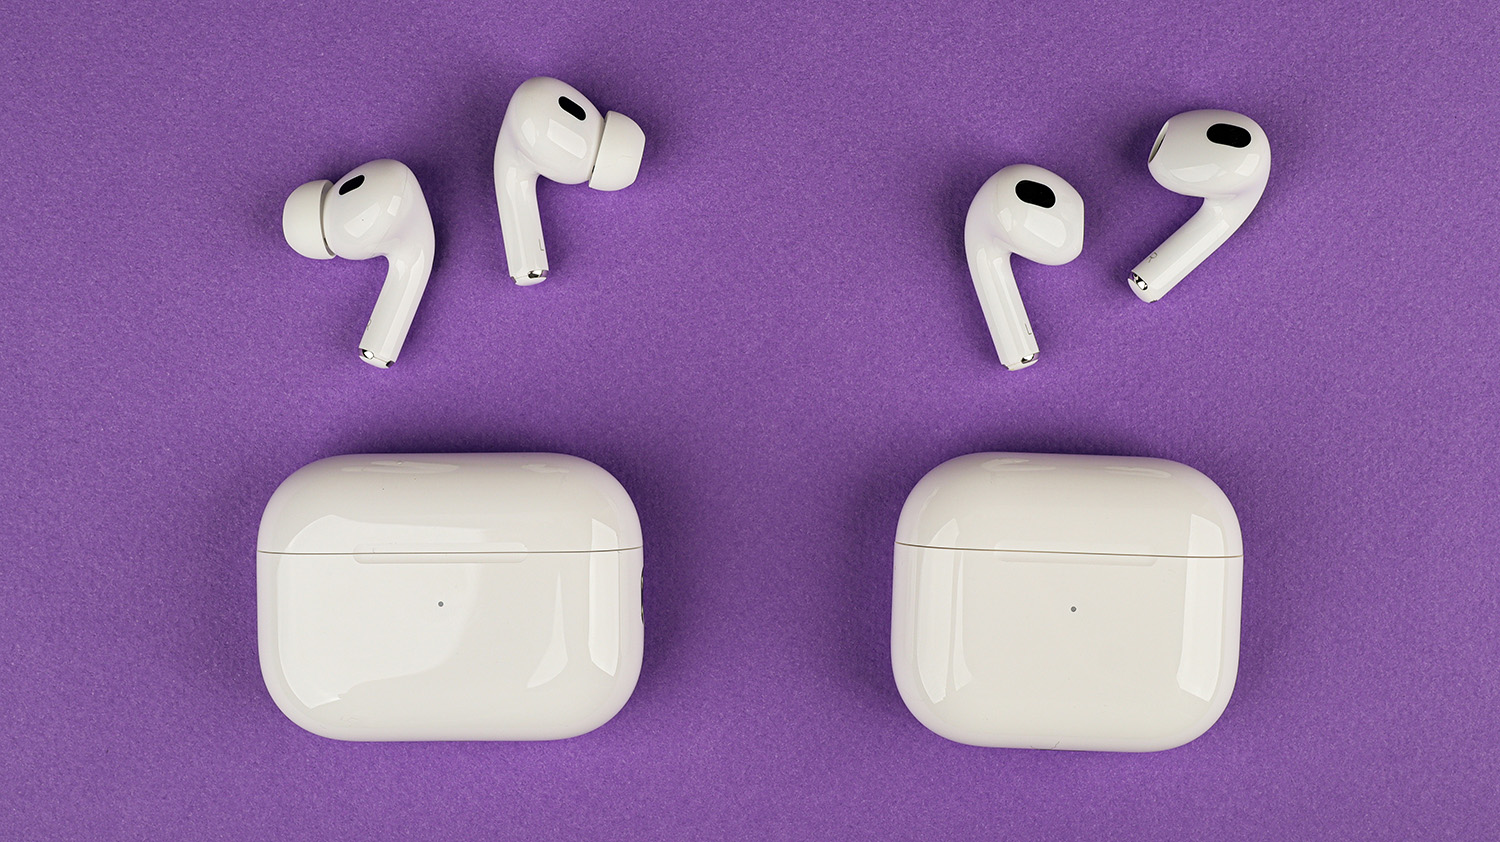 AirPods Pro 2 vs AirPods 3